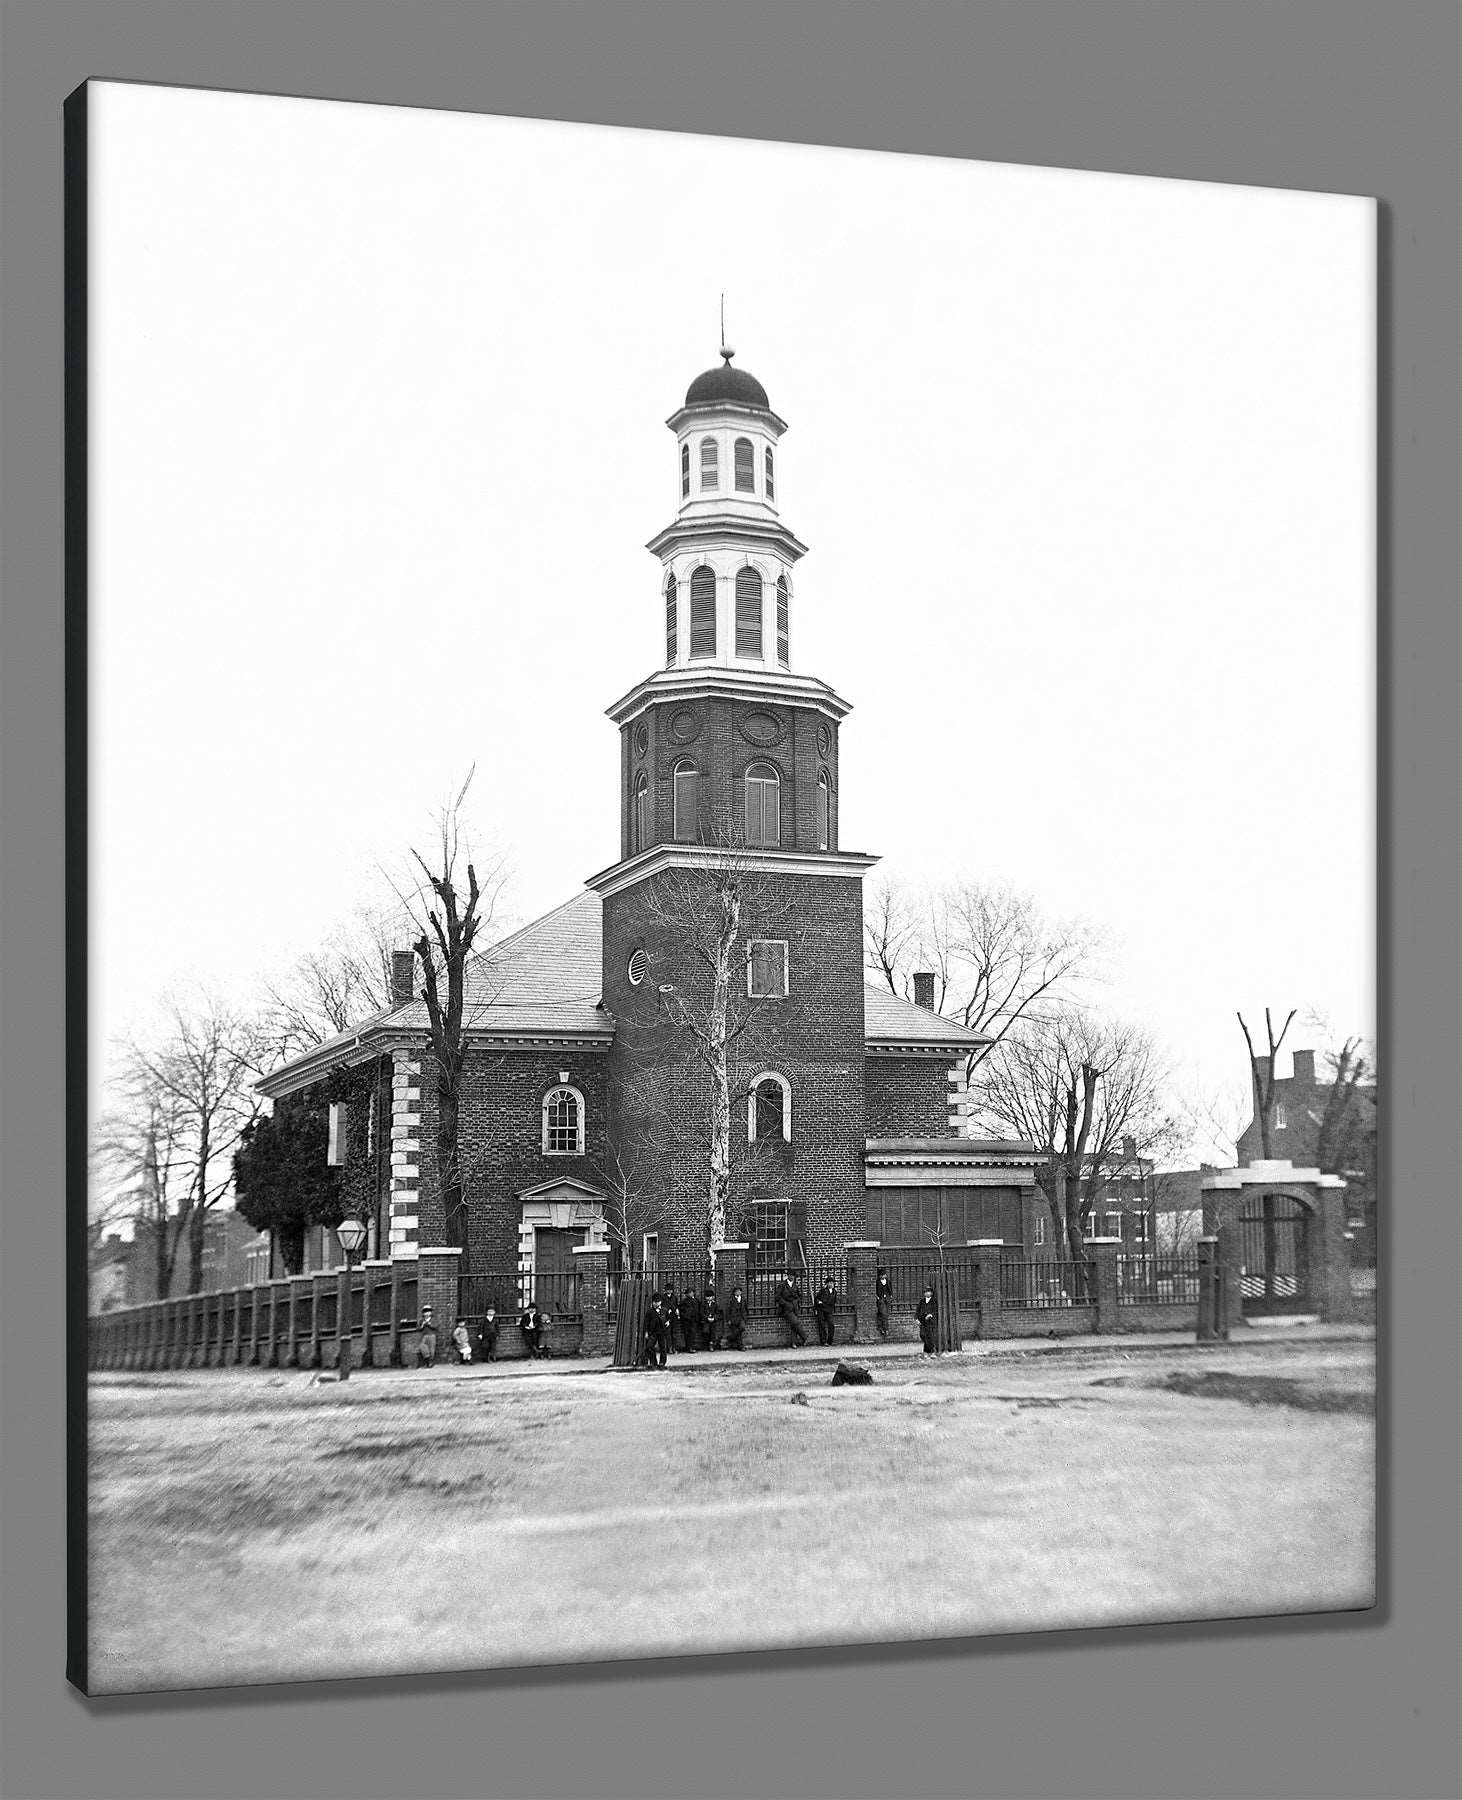 A canvas print reproduction of a vintage photo of Old Christ Church in Alexandria